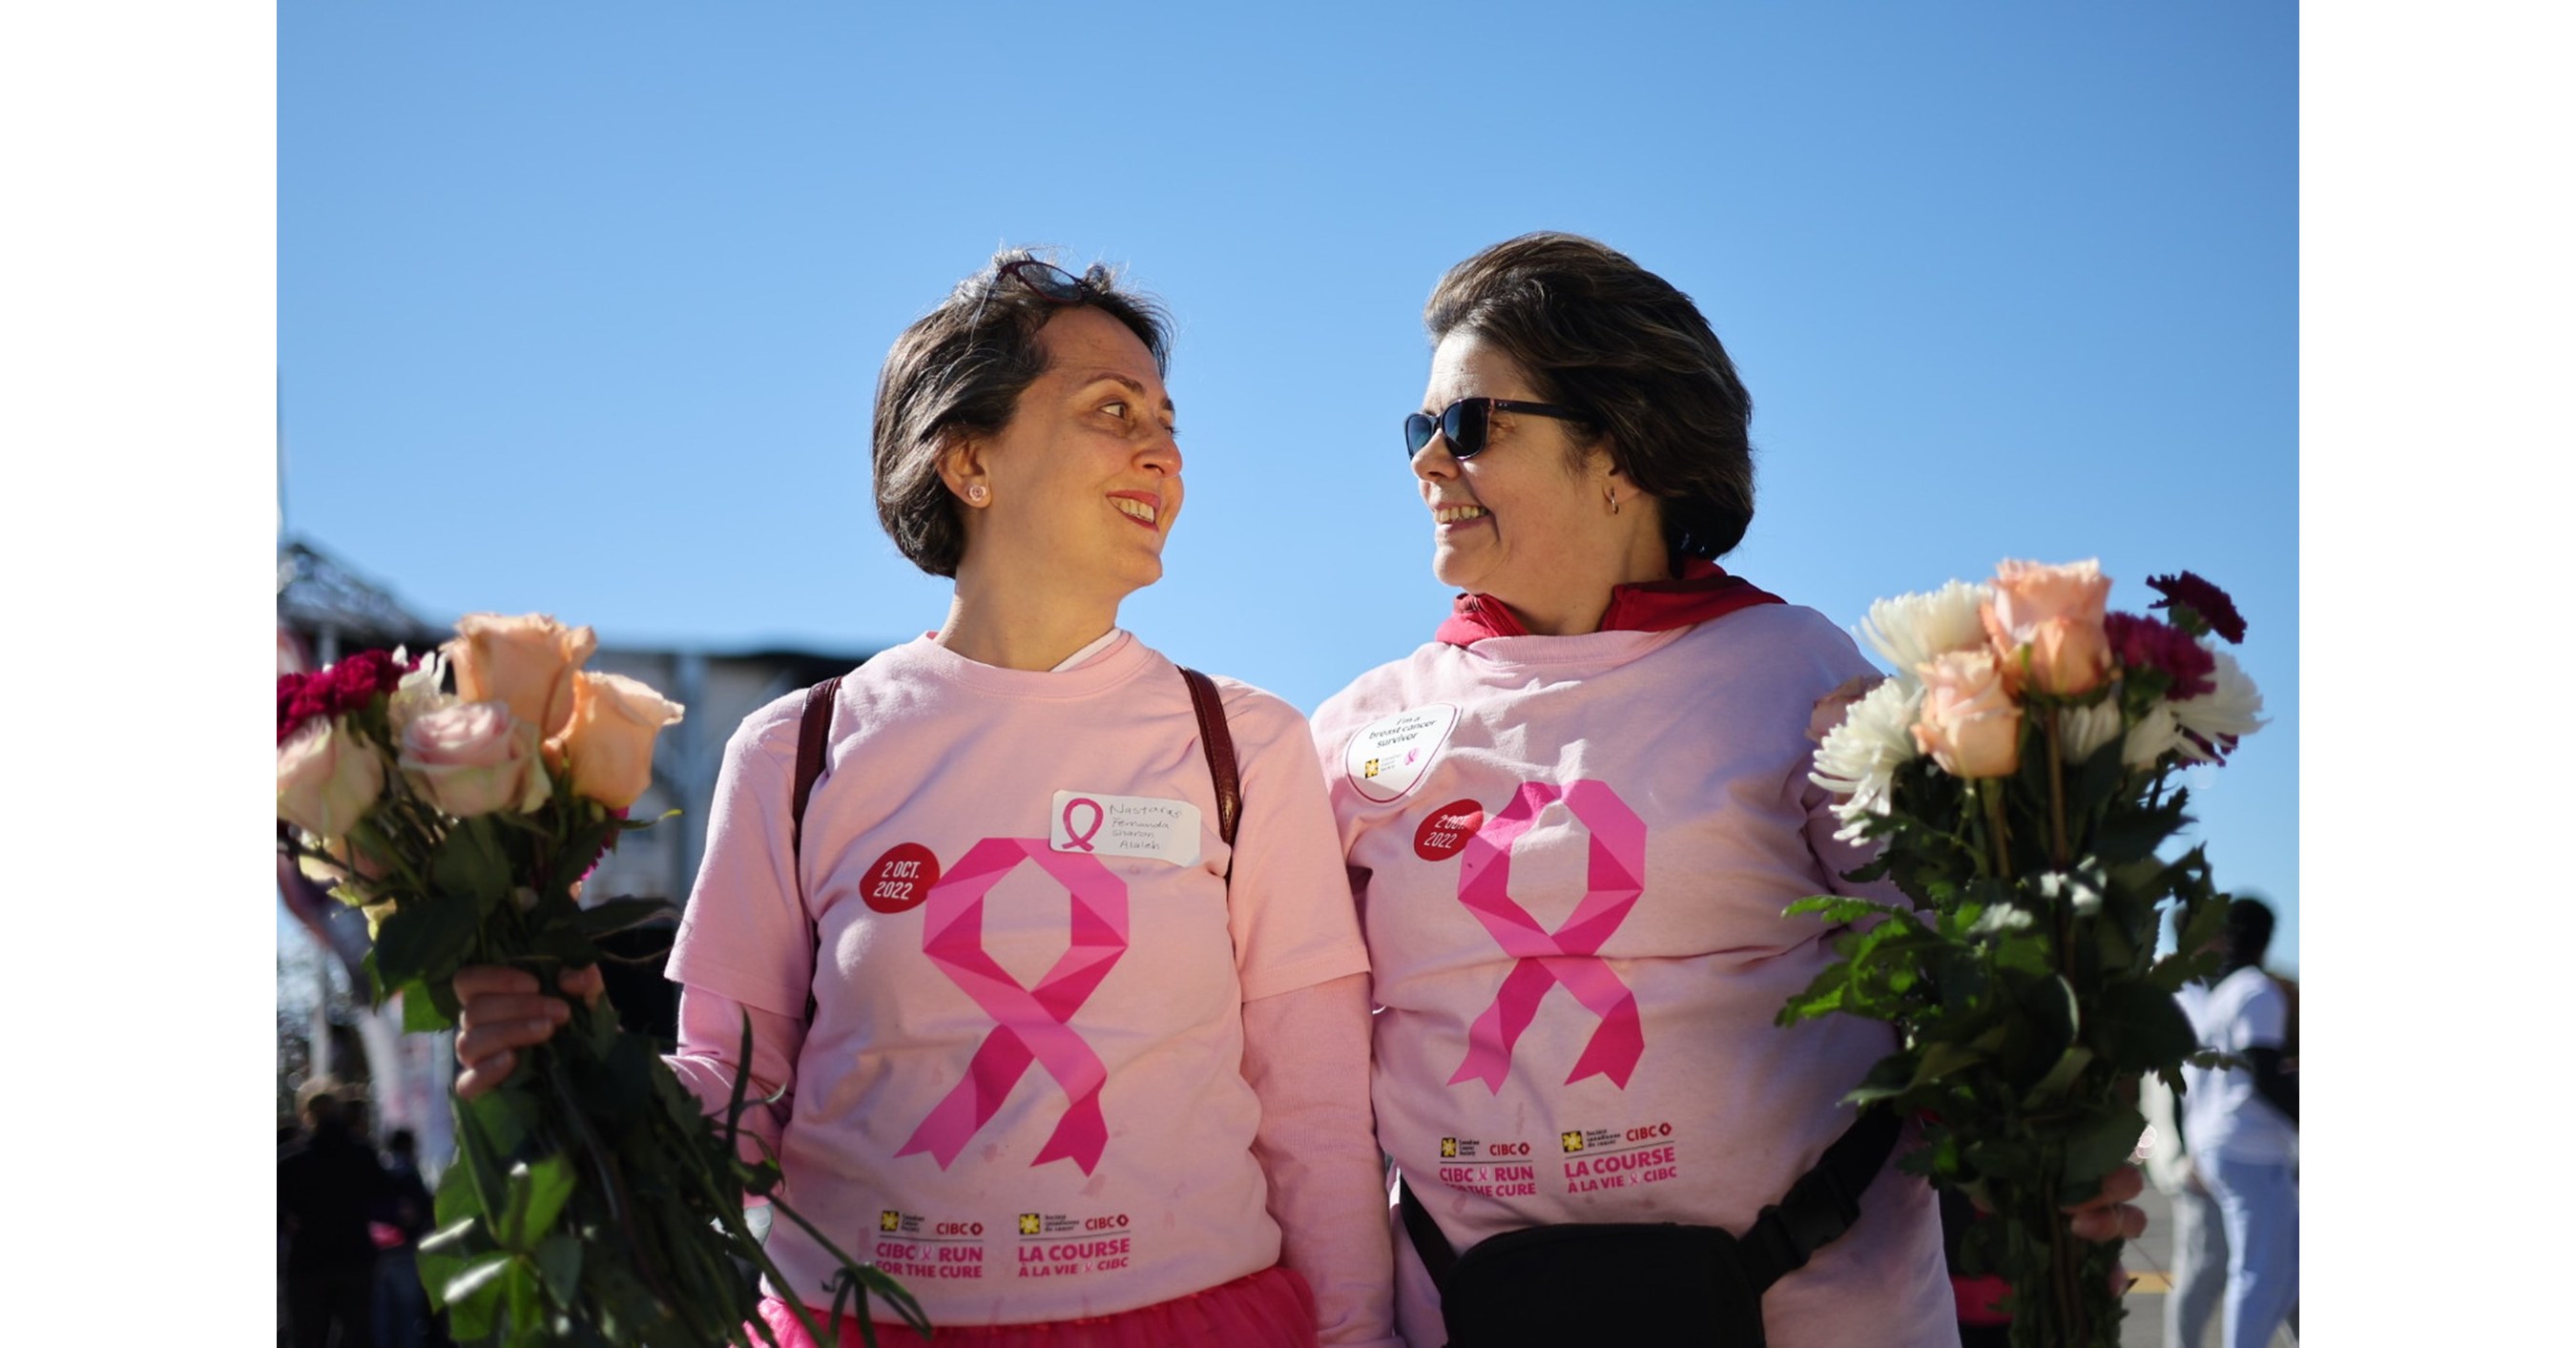 Breast Cancer, Canada - Fundraising, Events and More